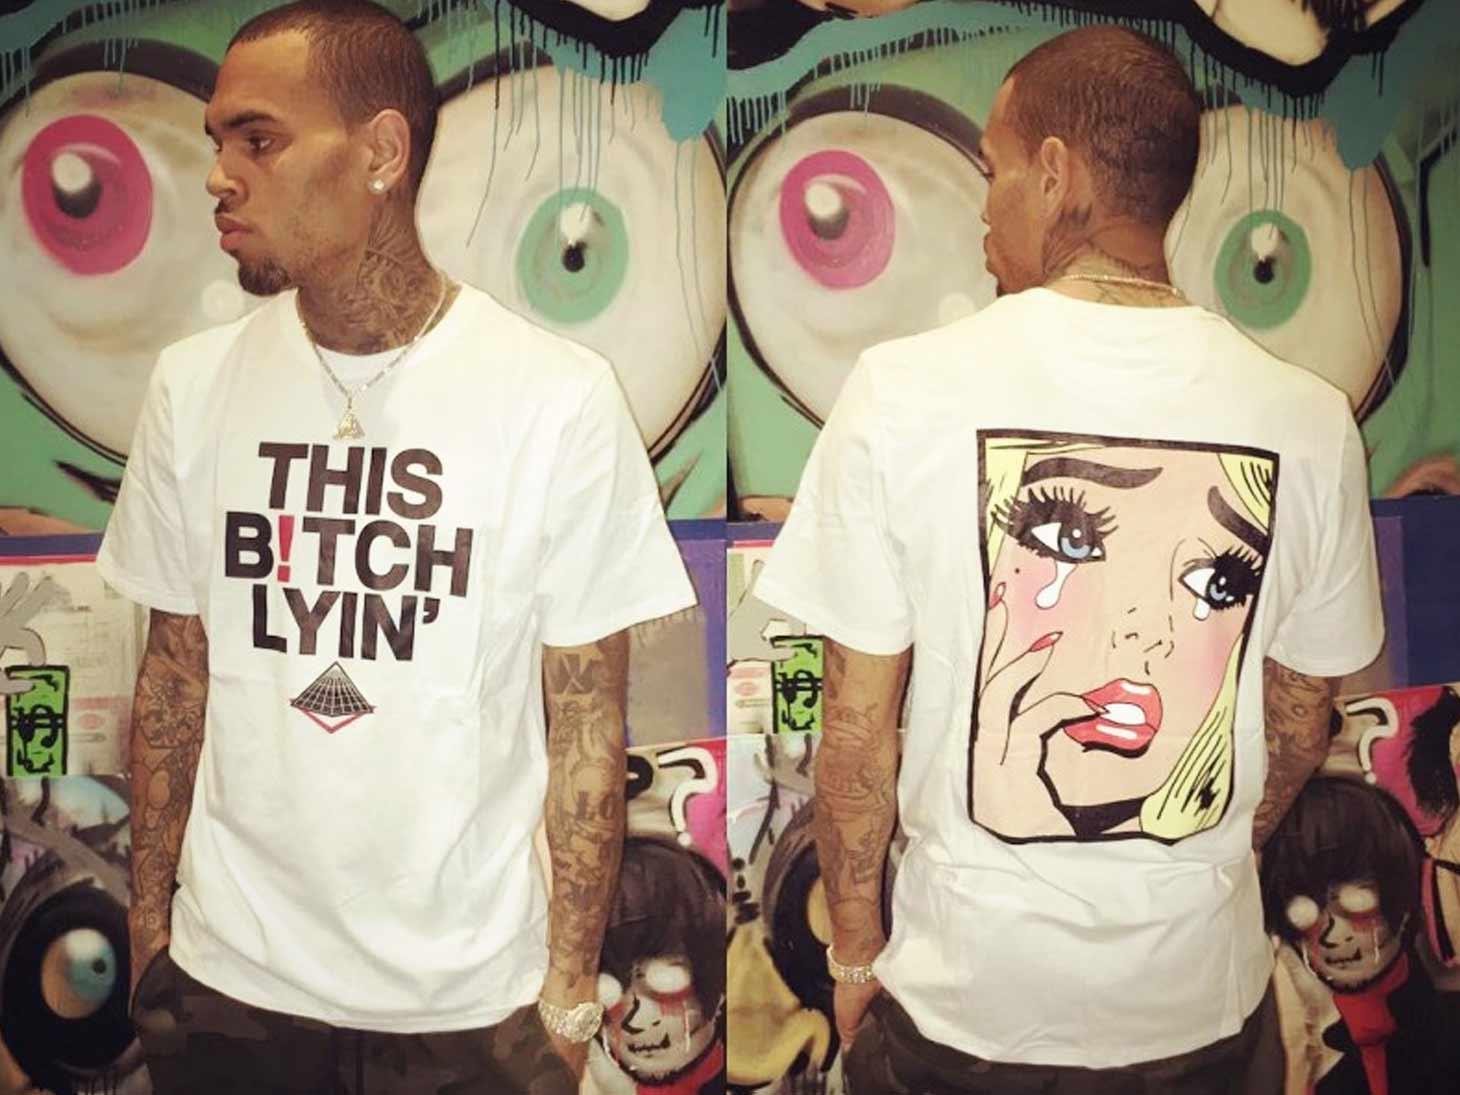 Chris Brown Promoting ‘THIS B!TCH LYIN’ Paris’ T-Shirts After Maintaining Innocence Over Rape Allegations